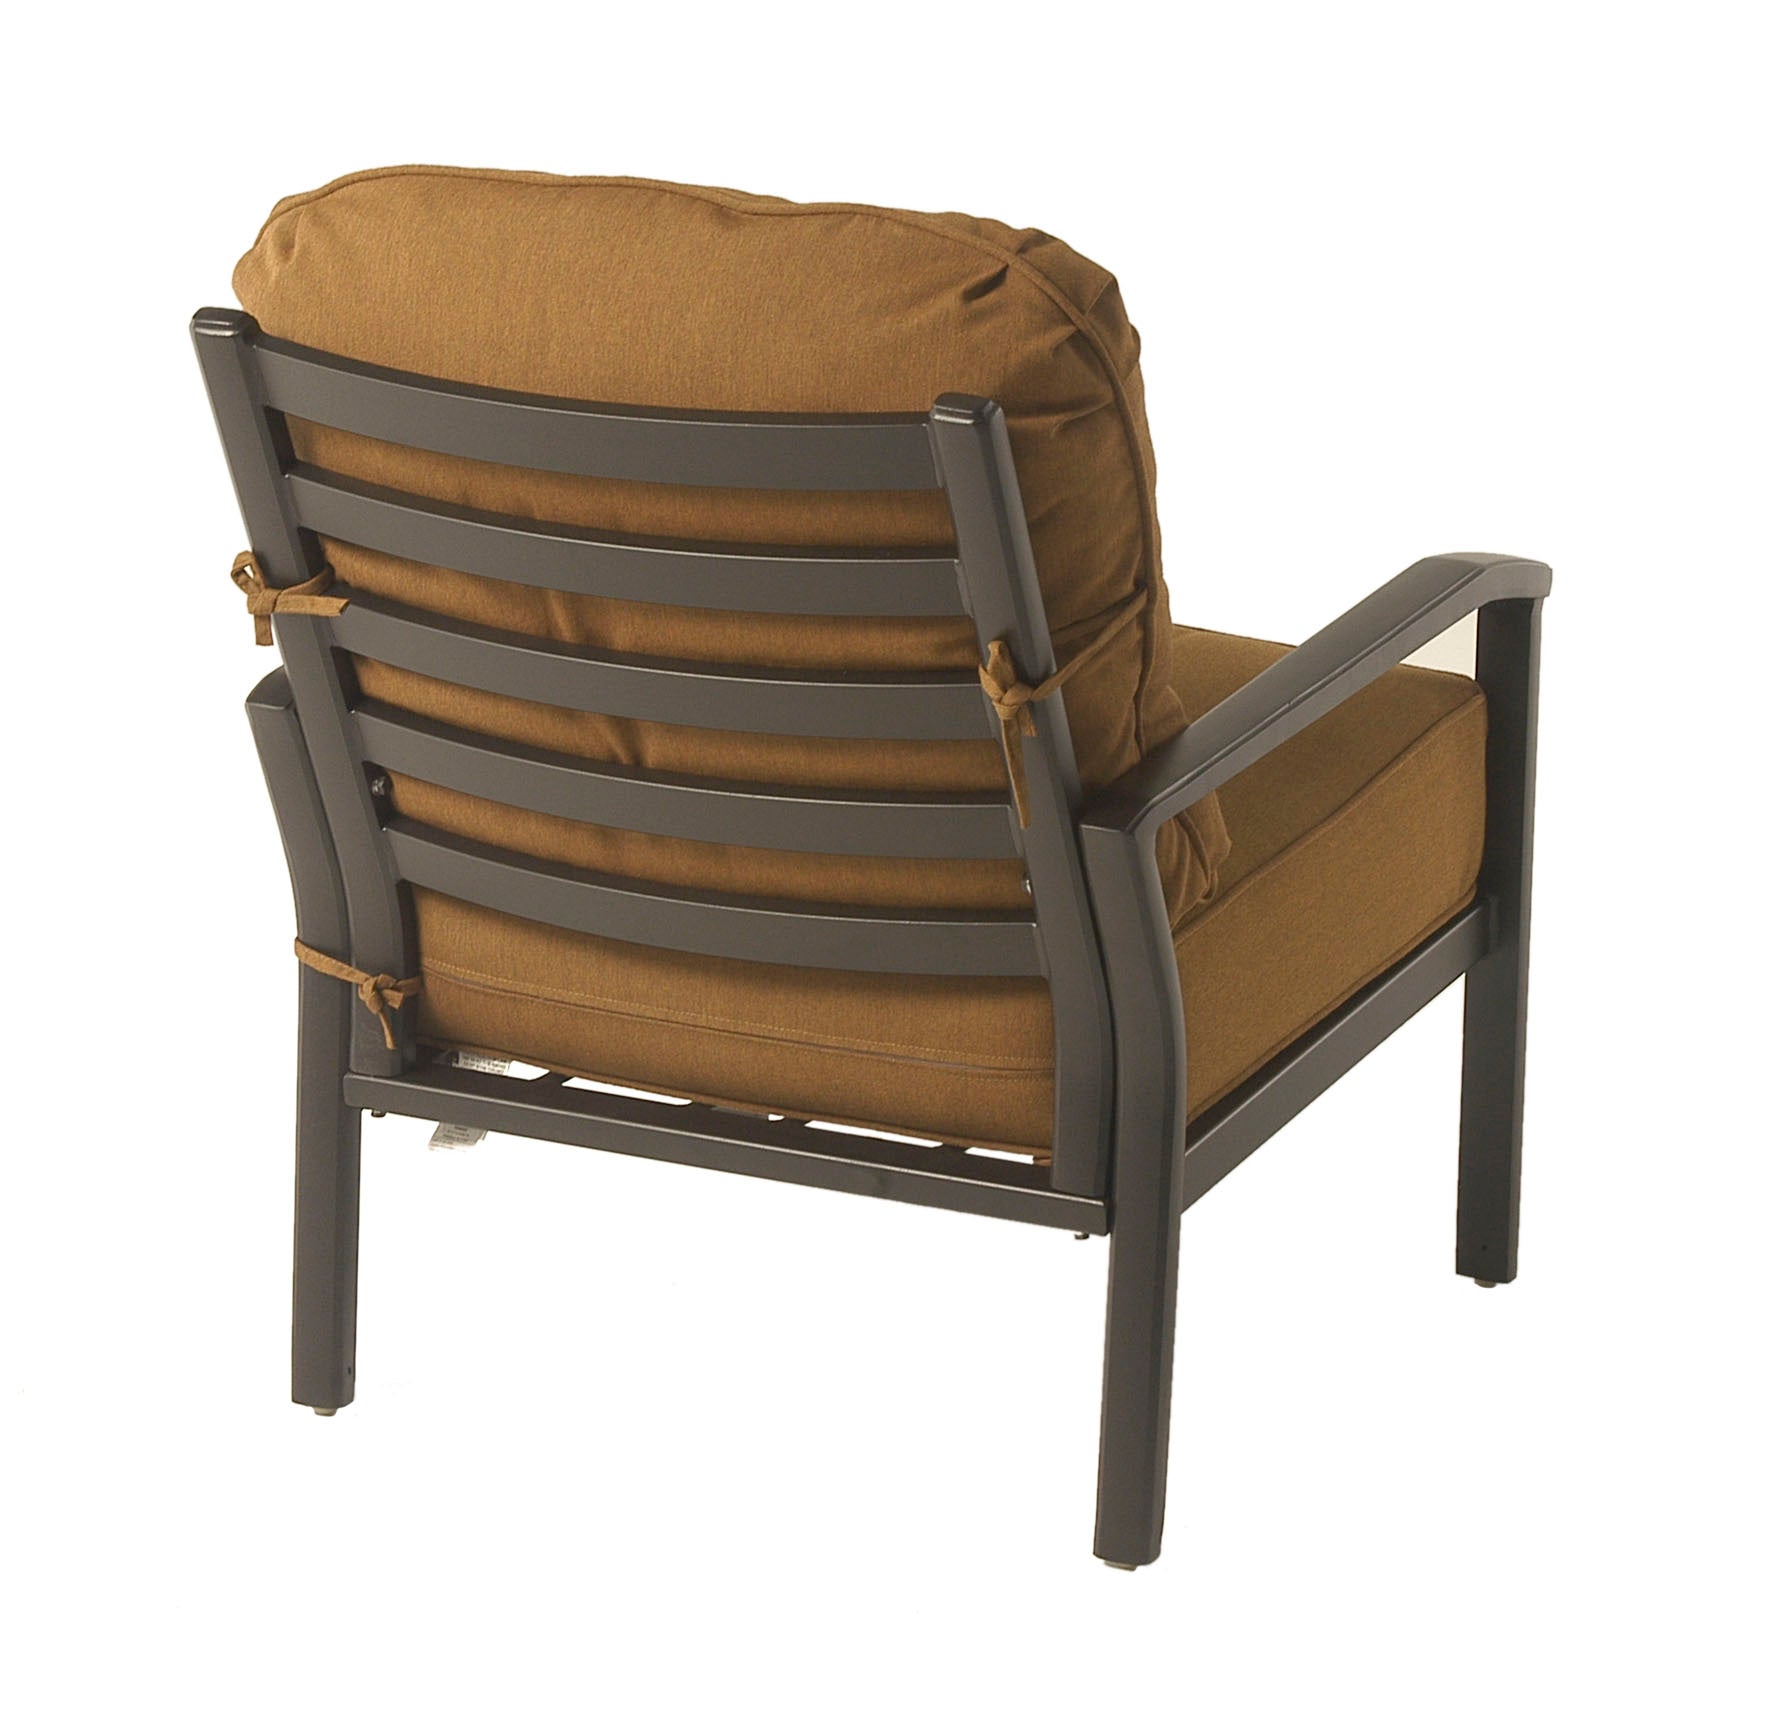 Westfiled Club Chair By Hanamint